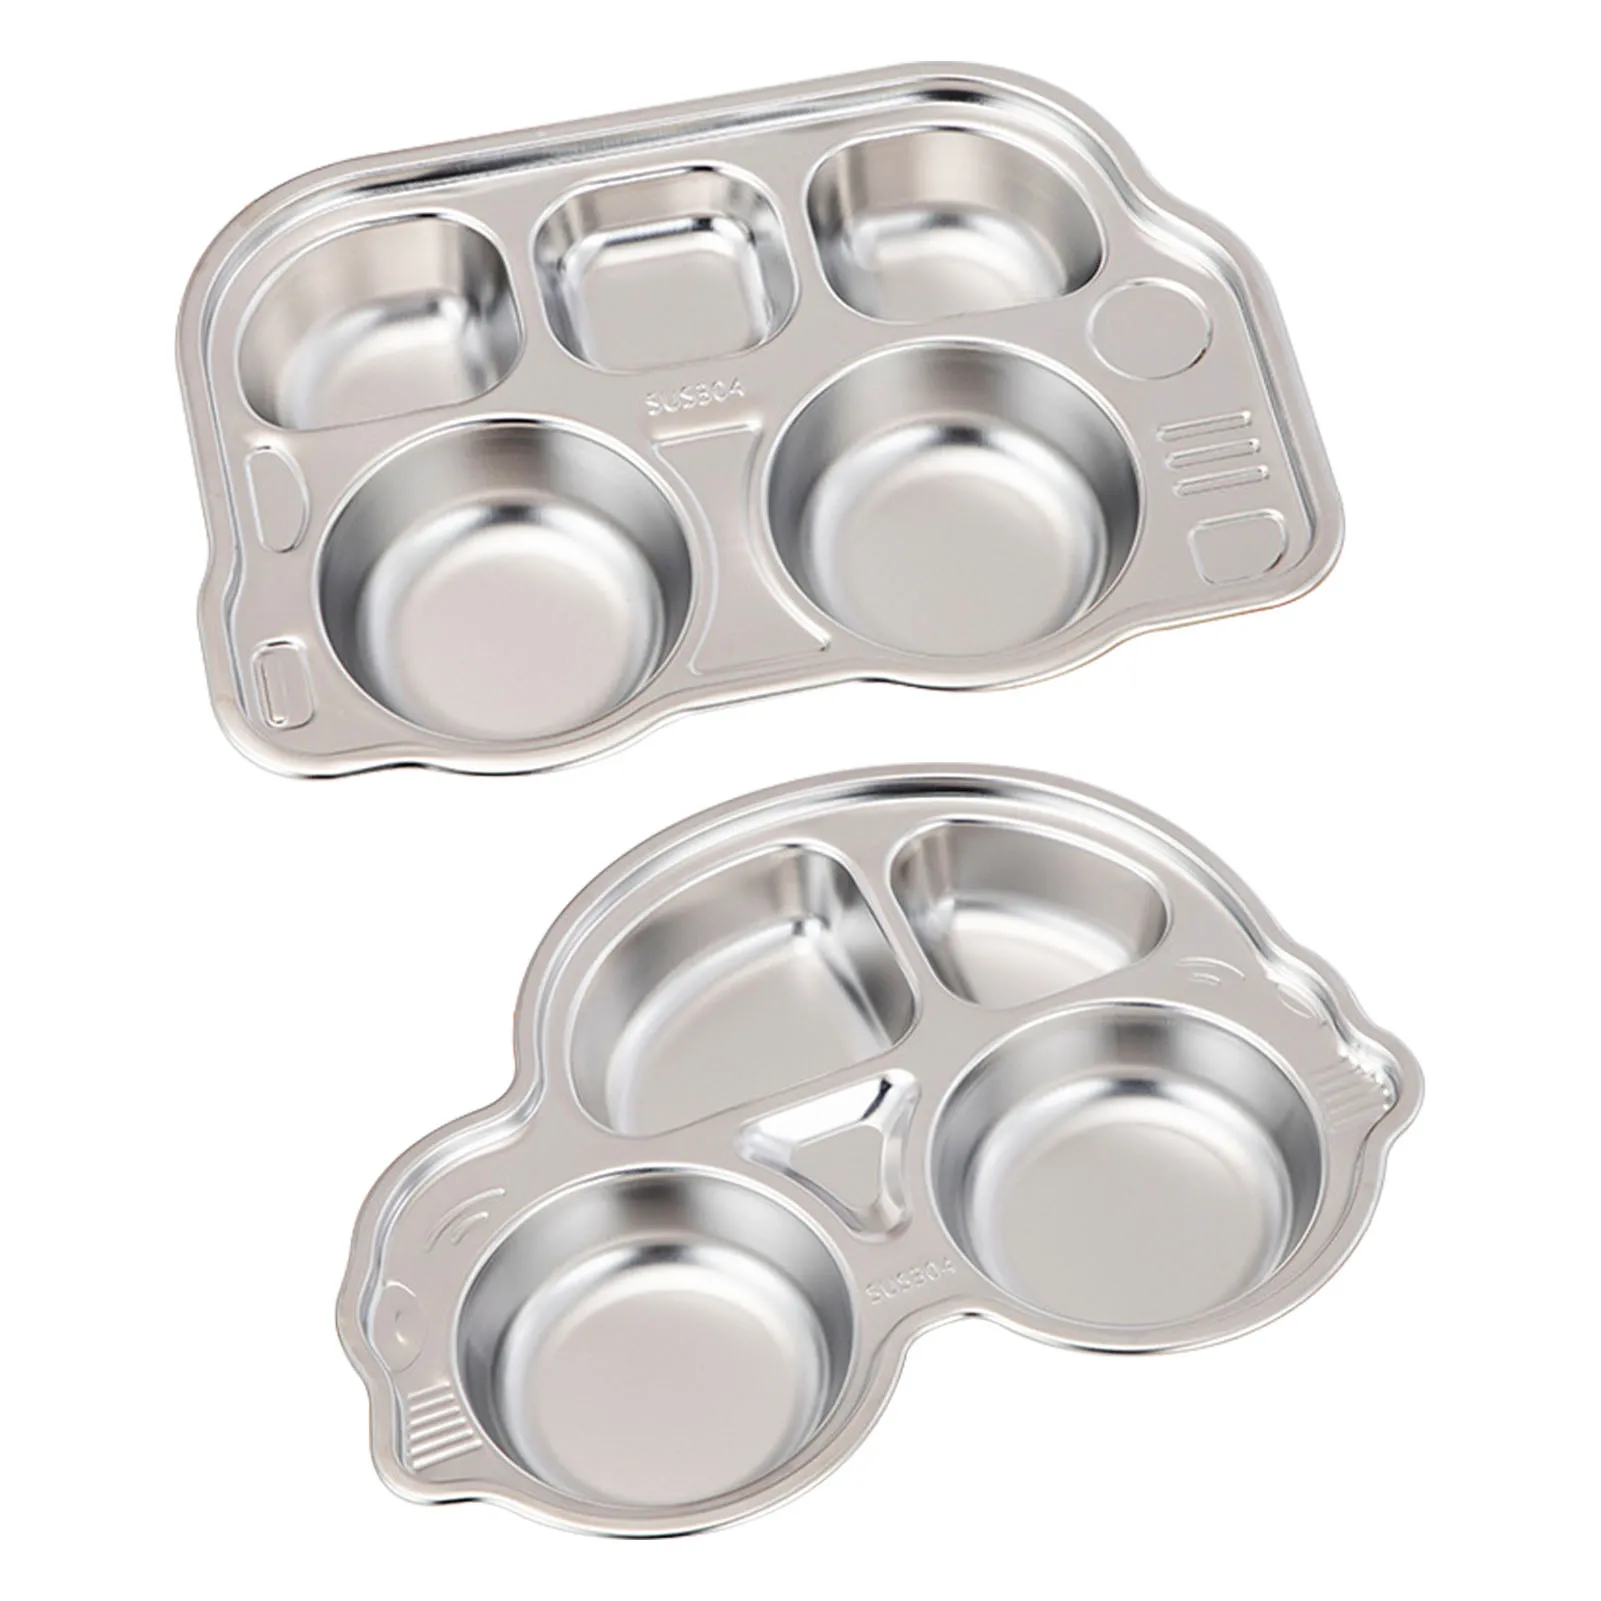 

Stainless Steel Divided Plates Unbreakable Dinner Plates For Kids Cute Shape Kids Divided Plates For Picky Eaters Lunch Camping